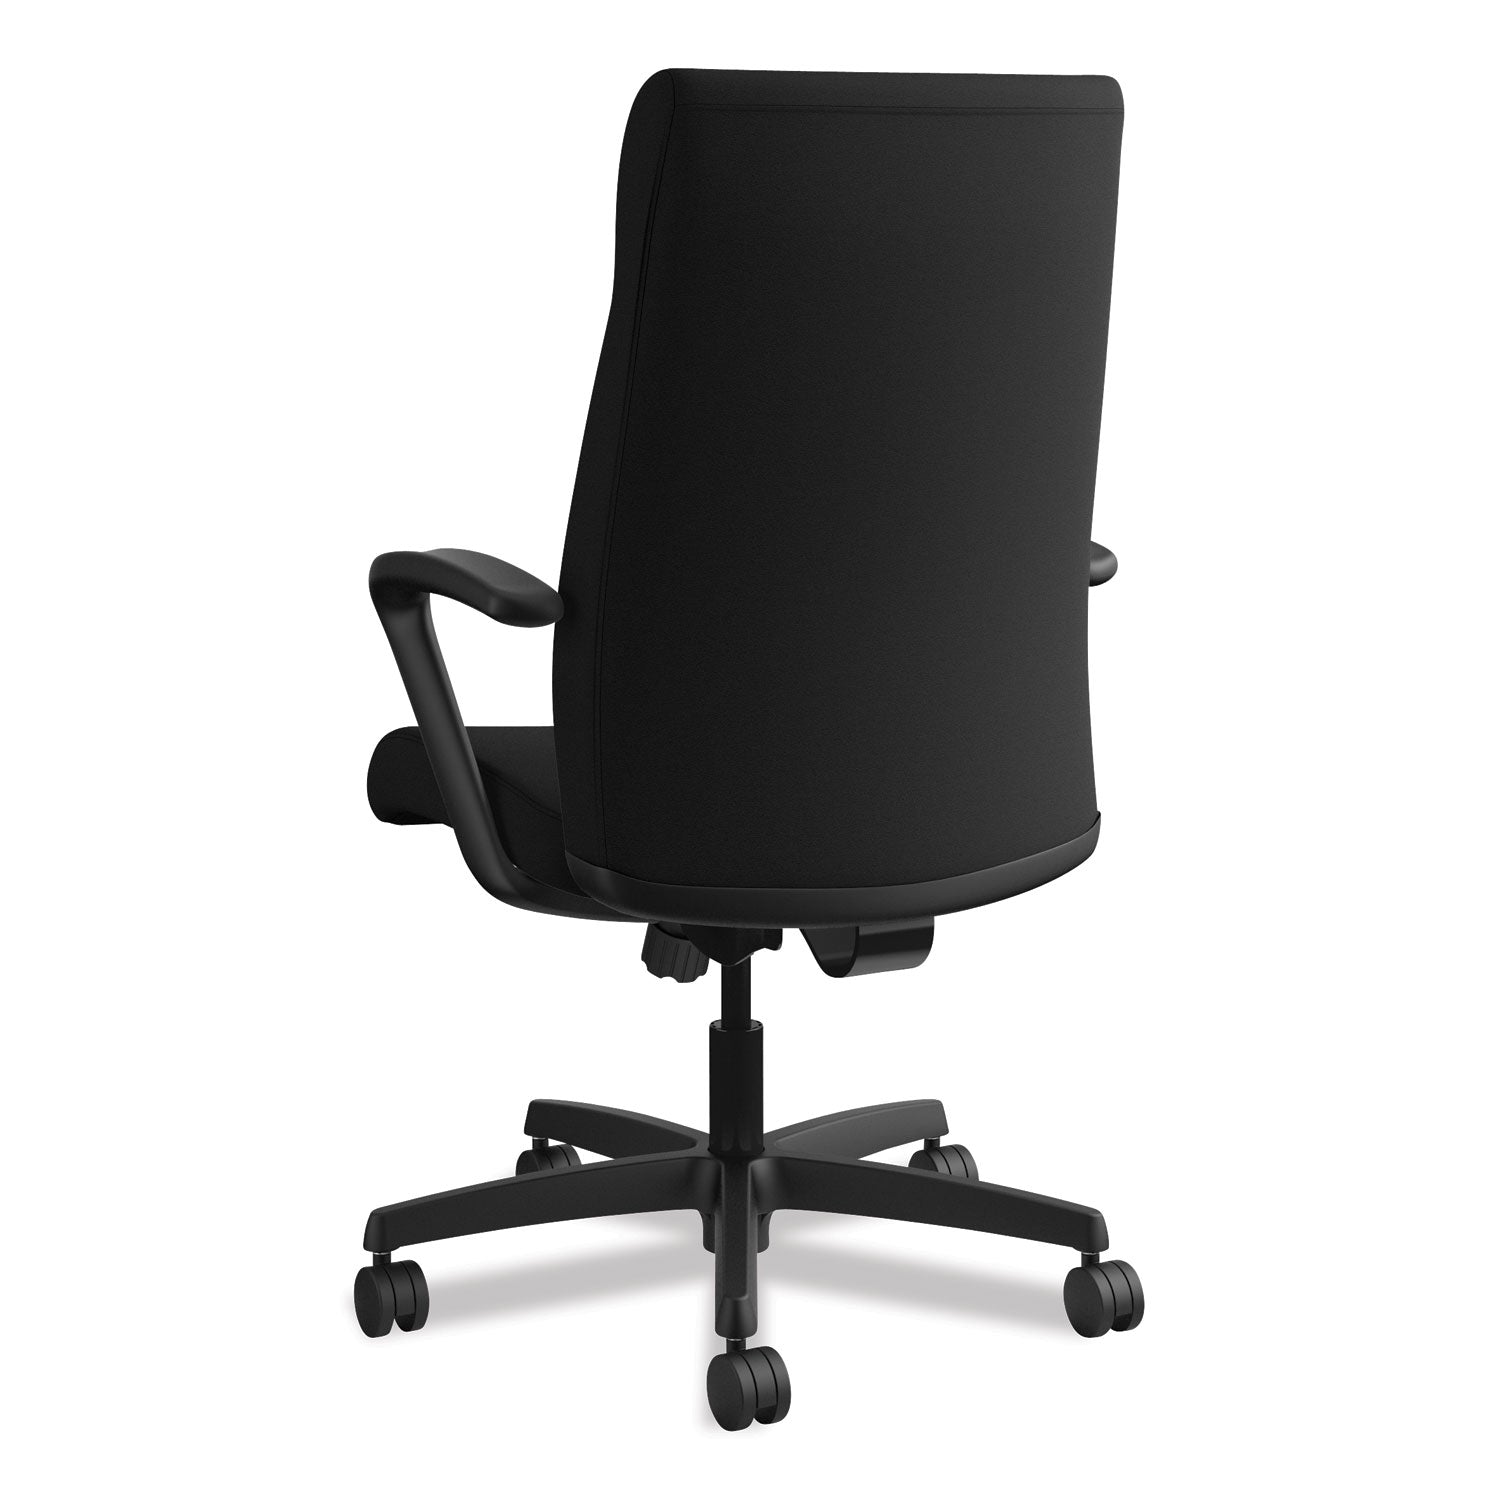 ignition-series-executive-high-back-chair-supports-up-to-300-lb-17-to-21-seat-height-black_honie102cu10 - 8